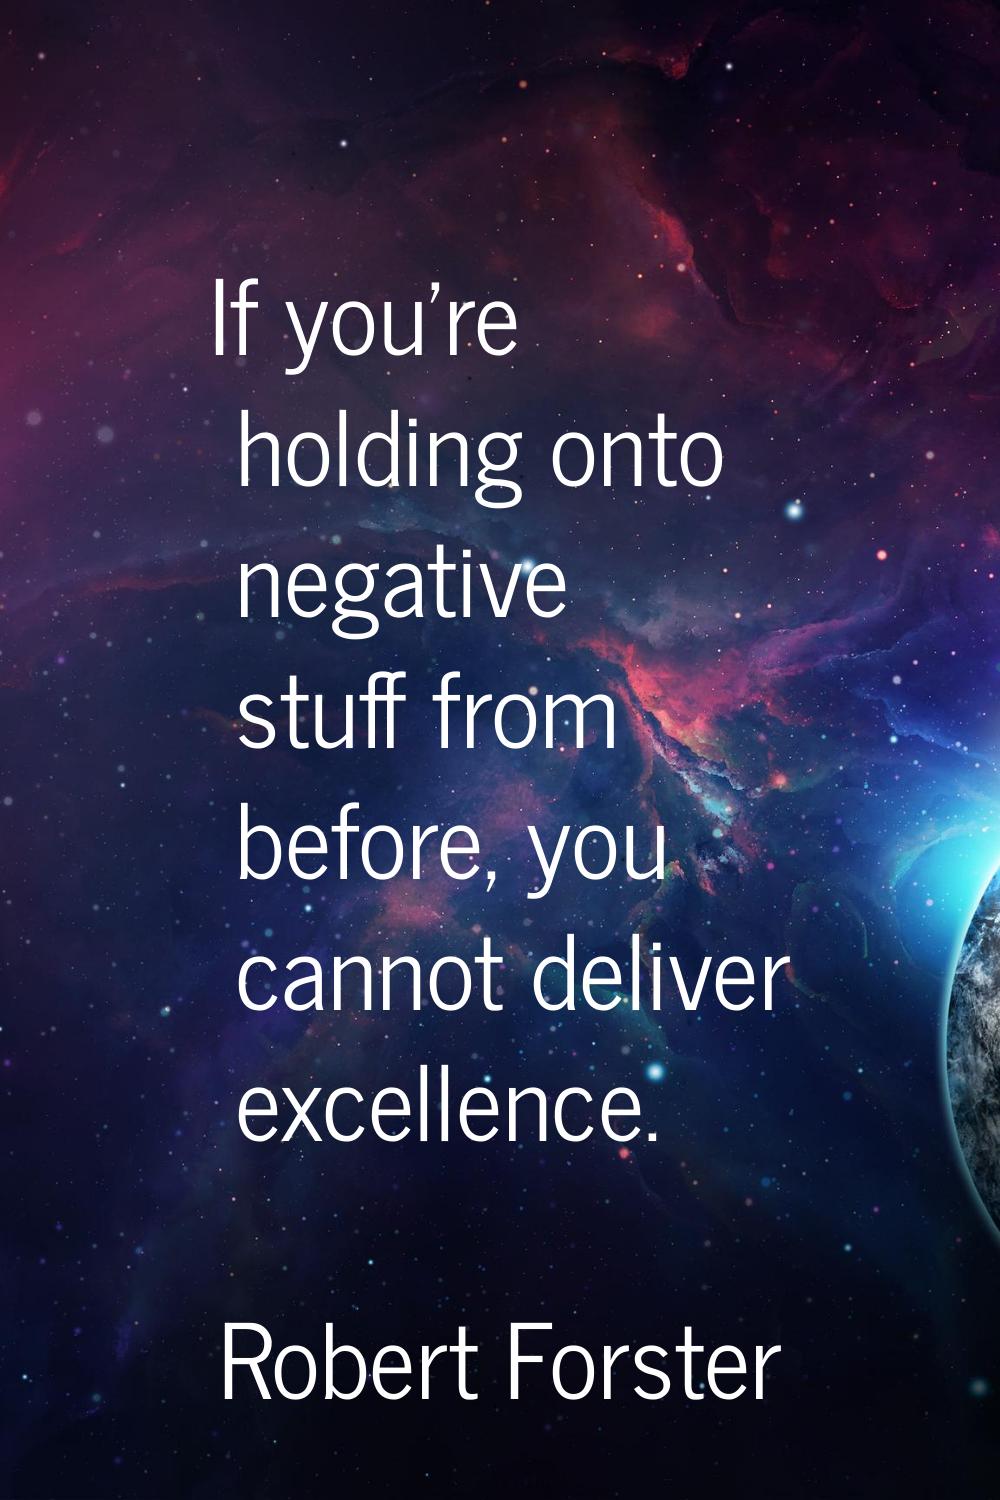 If you're holding onto negative stuff from before, you cannot deliver excellence.